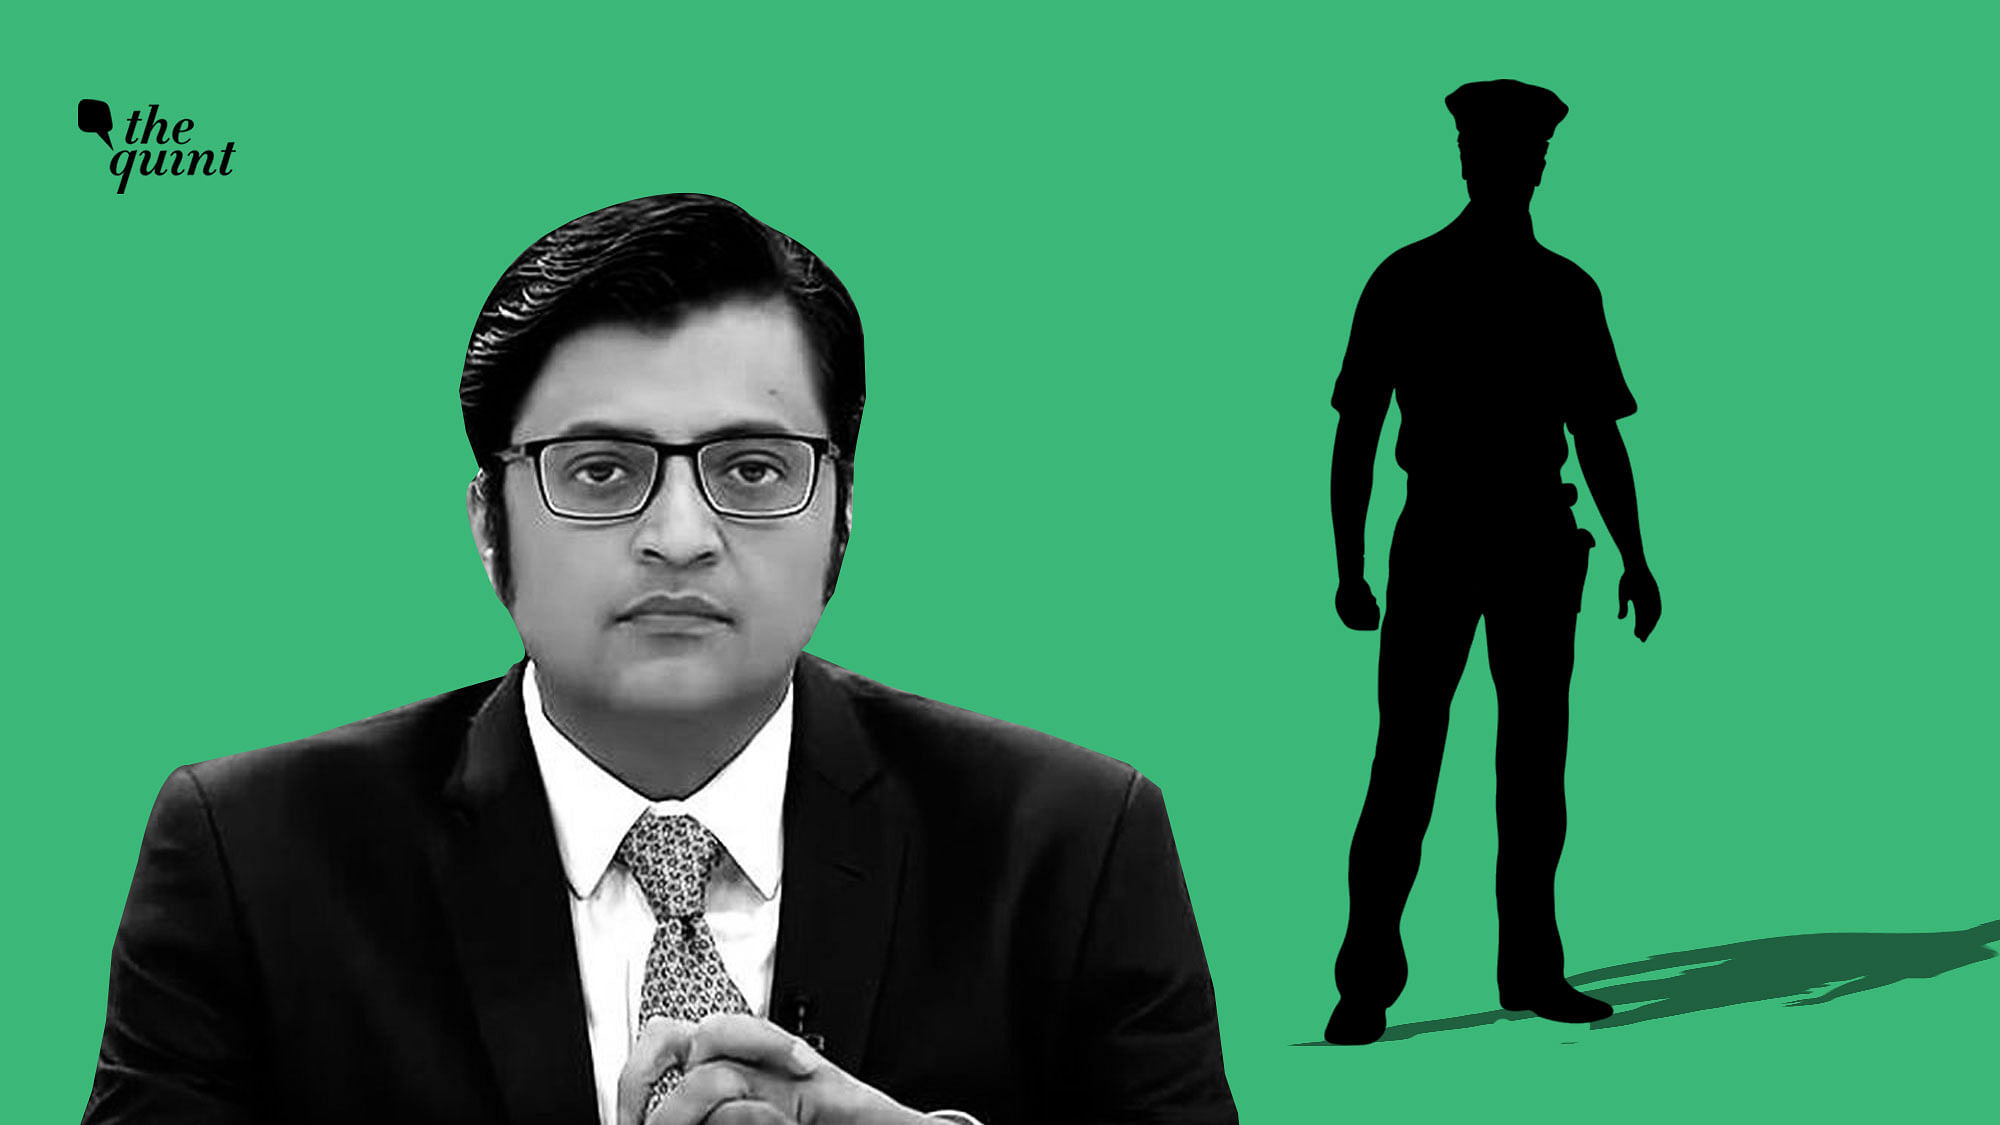 A senior police official probing Arnab Goswami tested positive for COVID-19, claimed Goswami’s advocate in SC.